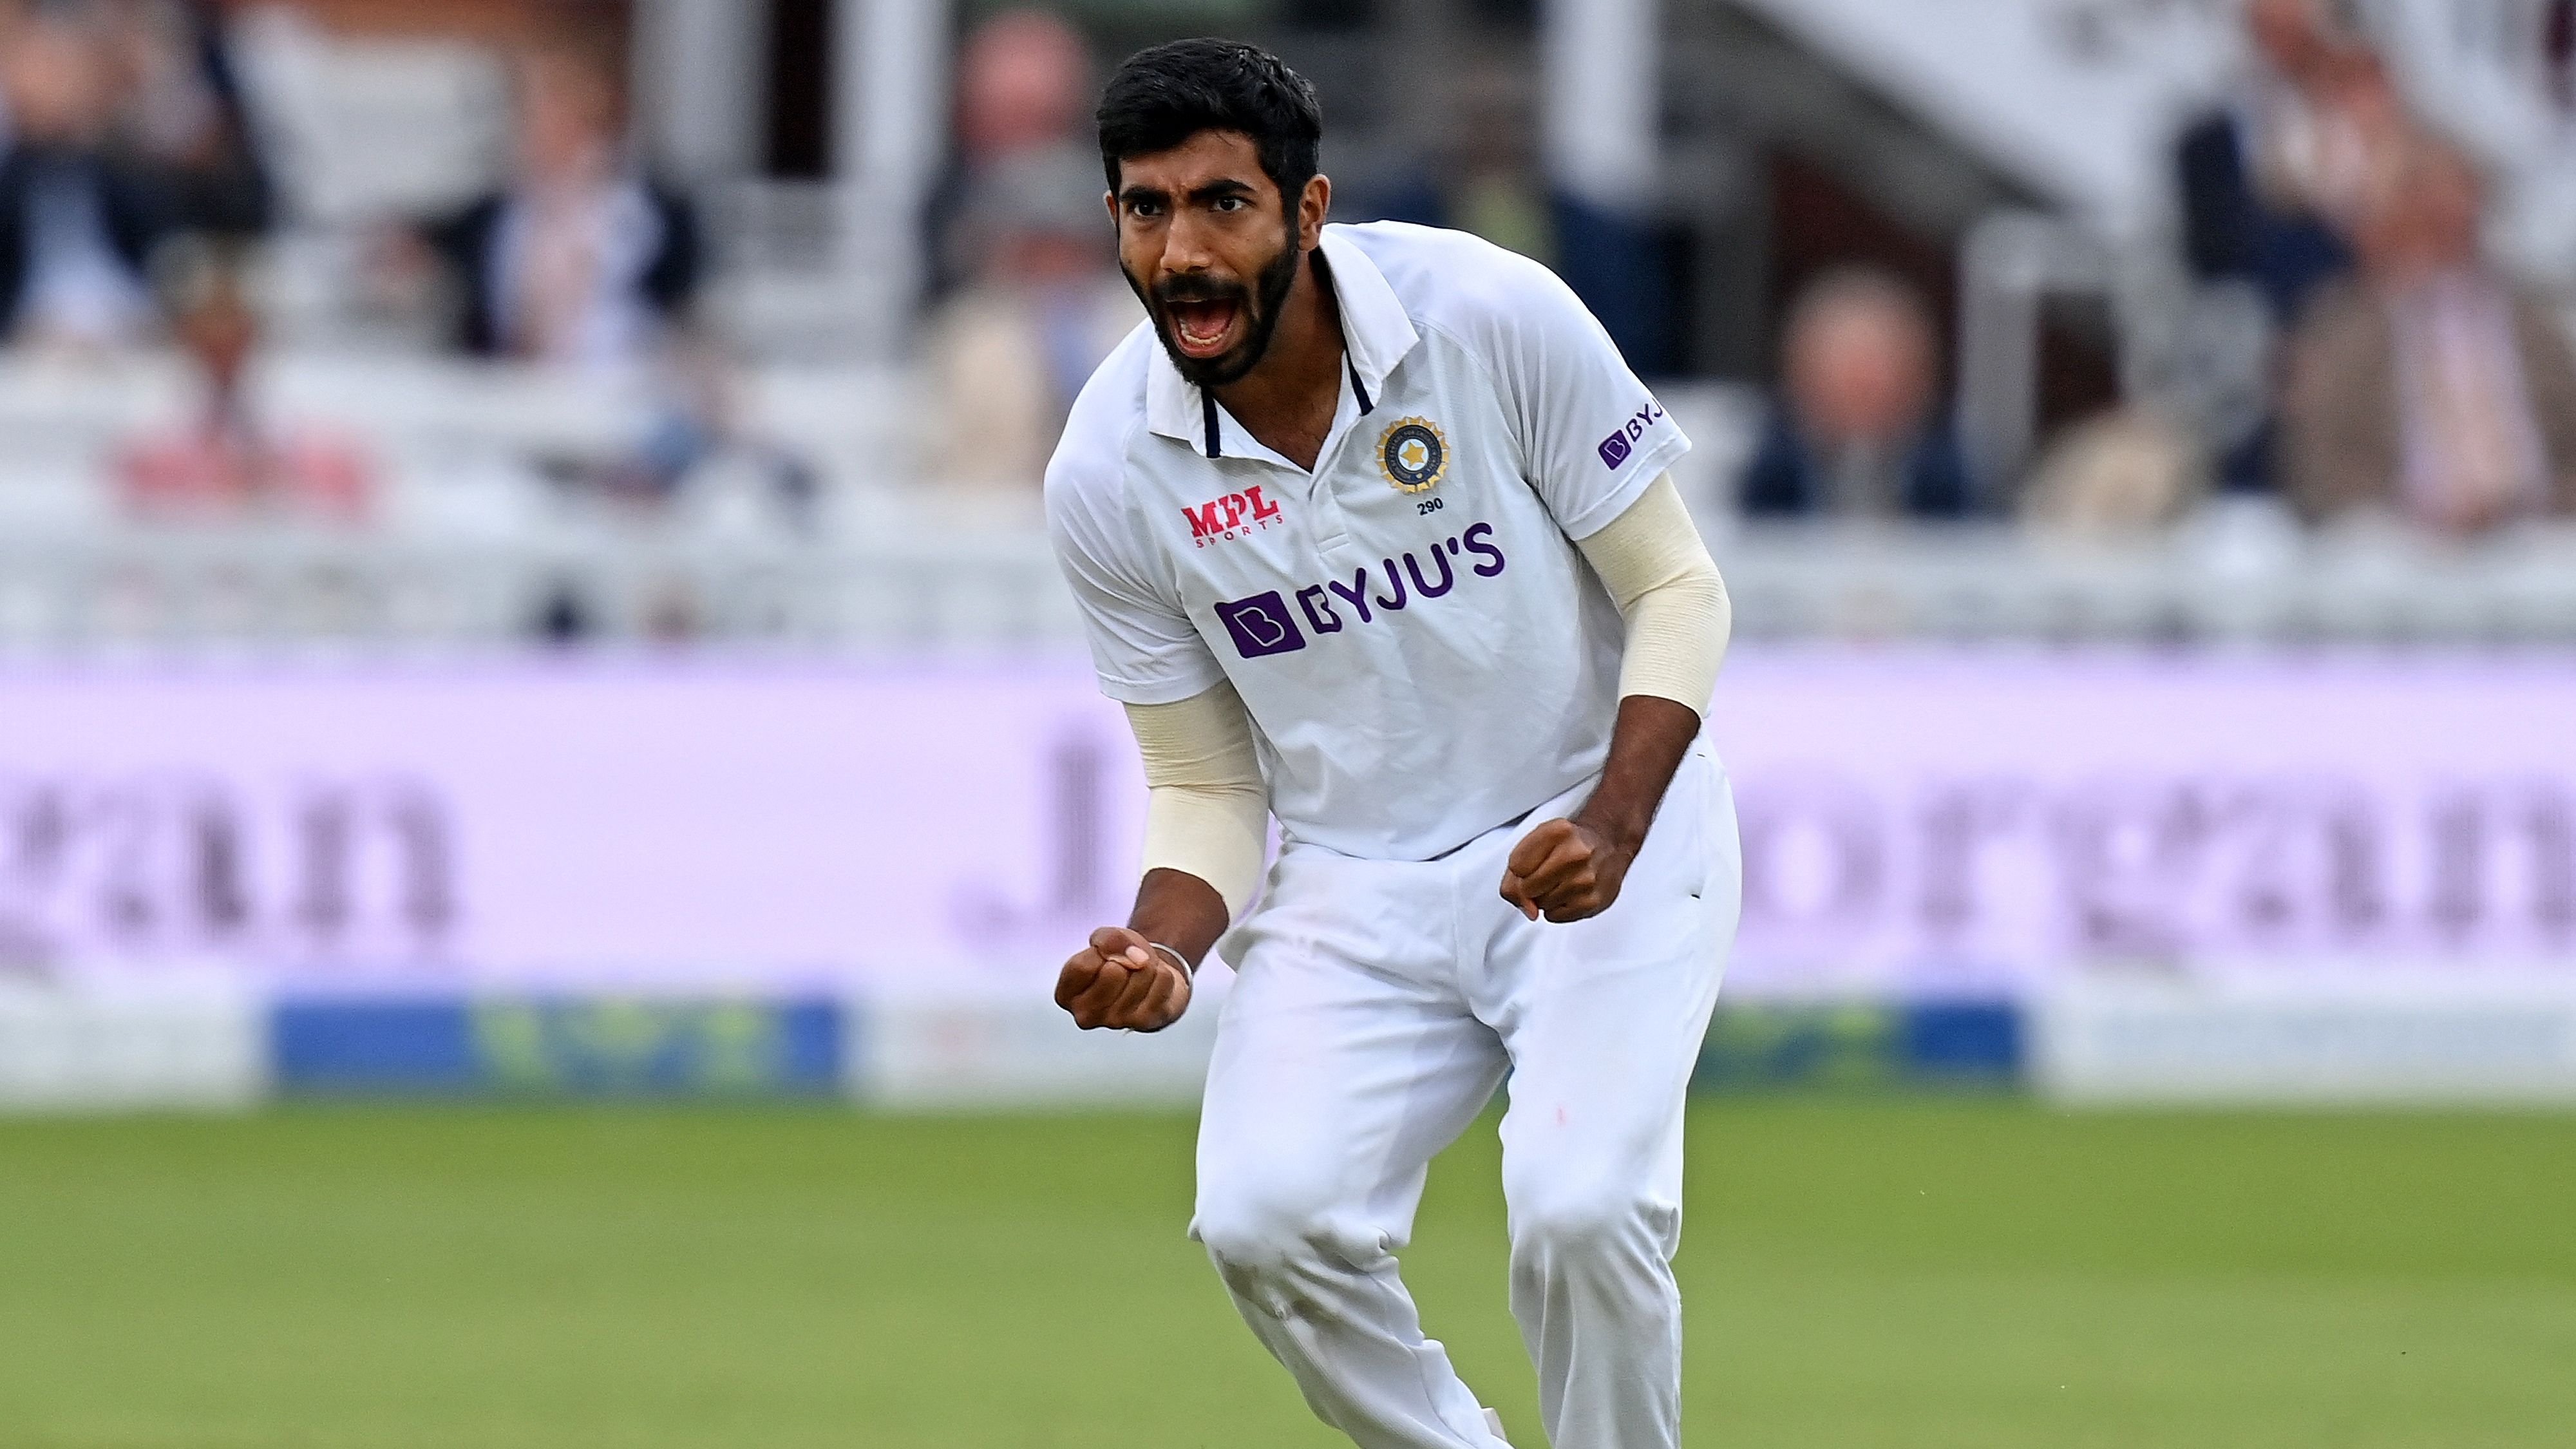 IND vs SA | WATCH : Jasprit Bumrah gives warning to South Africa batsmen ahead of Cape Town Test